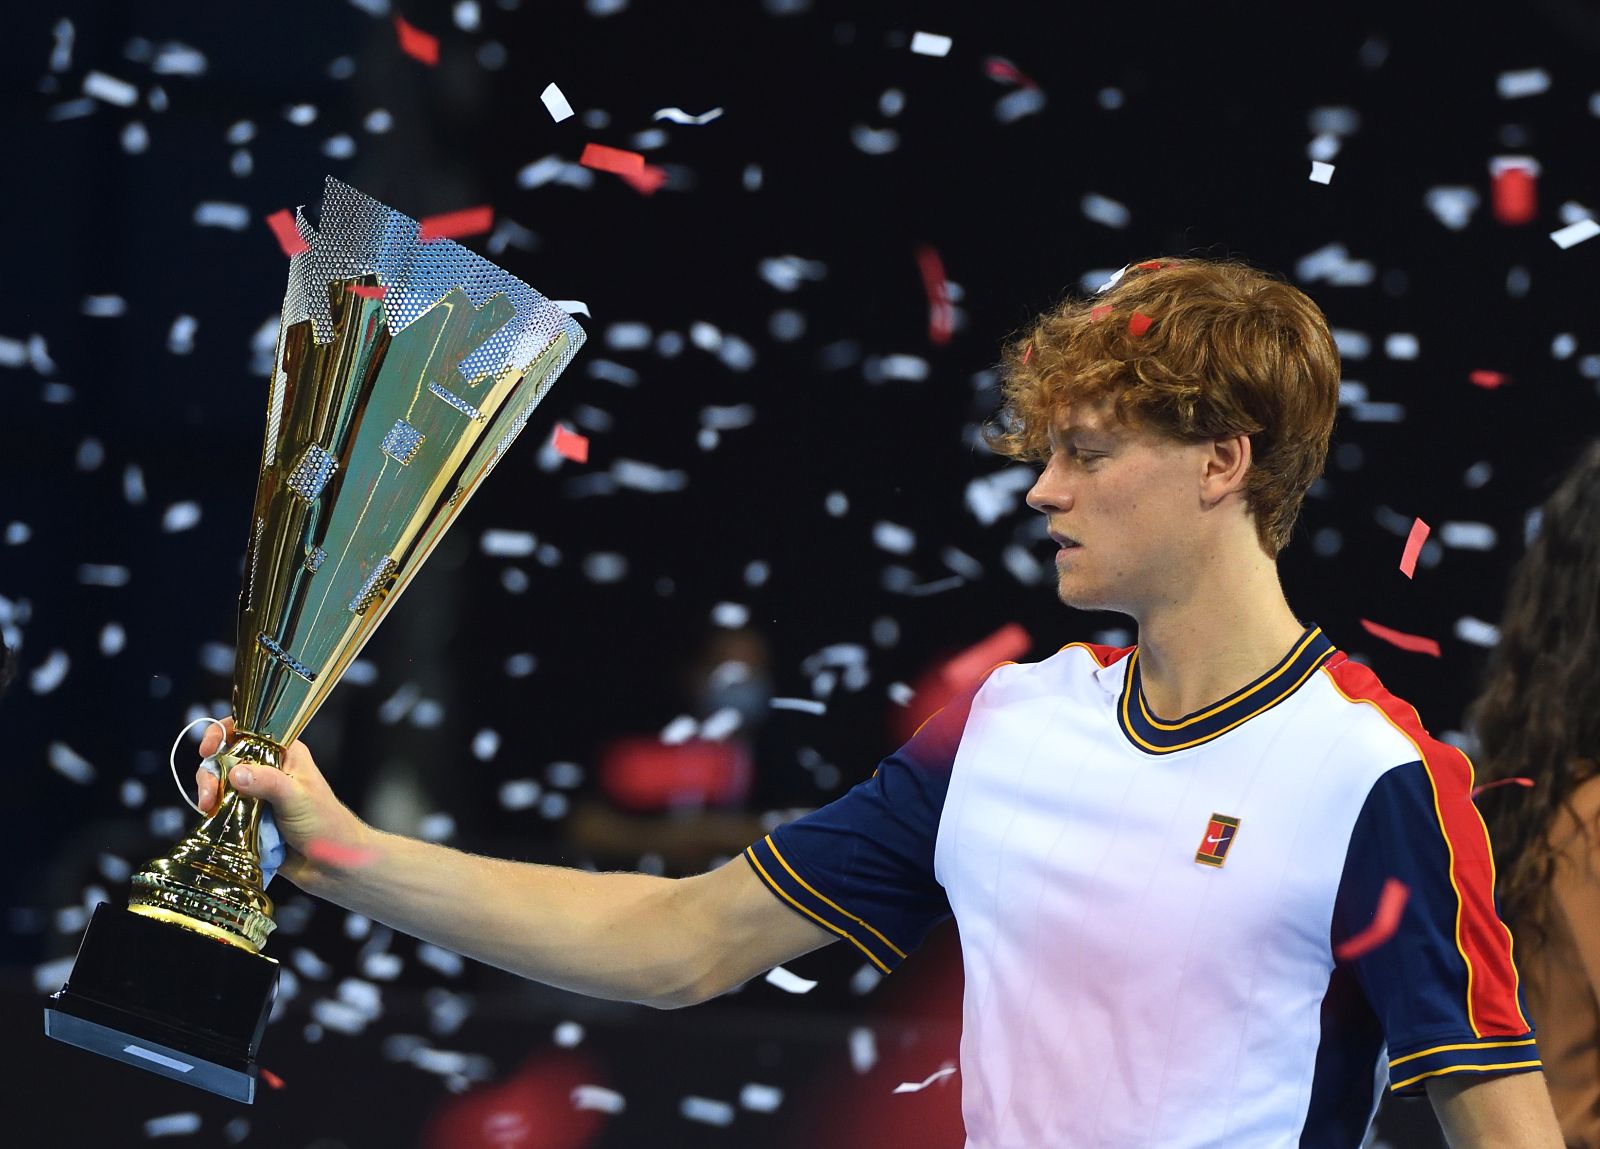 epa09503737 Jannik Sinner of Italy holds his trophy after winning the final match against Gael Monfils of France at the Sofia Open ATP 250 tennis tournament in Sofia, Bulgaria, 03 October 2021.  EPA/VASSIL DONEV